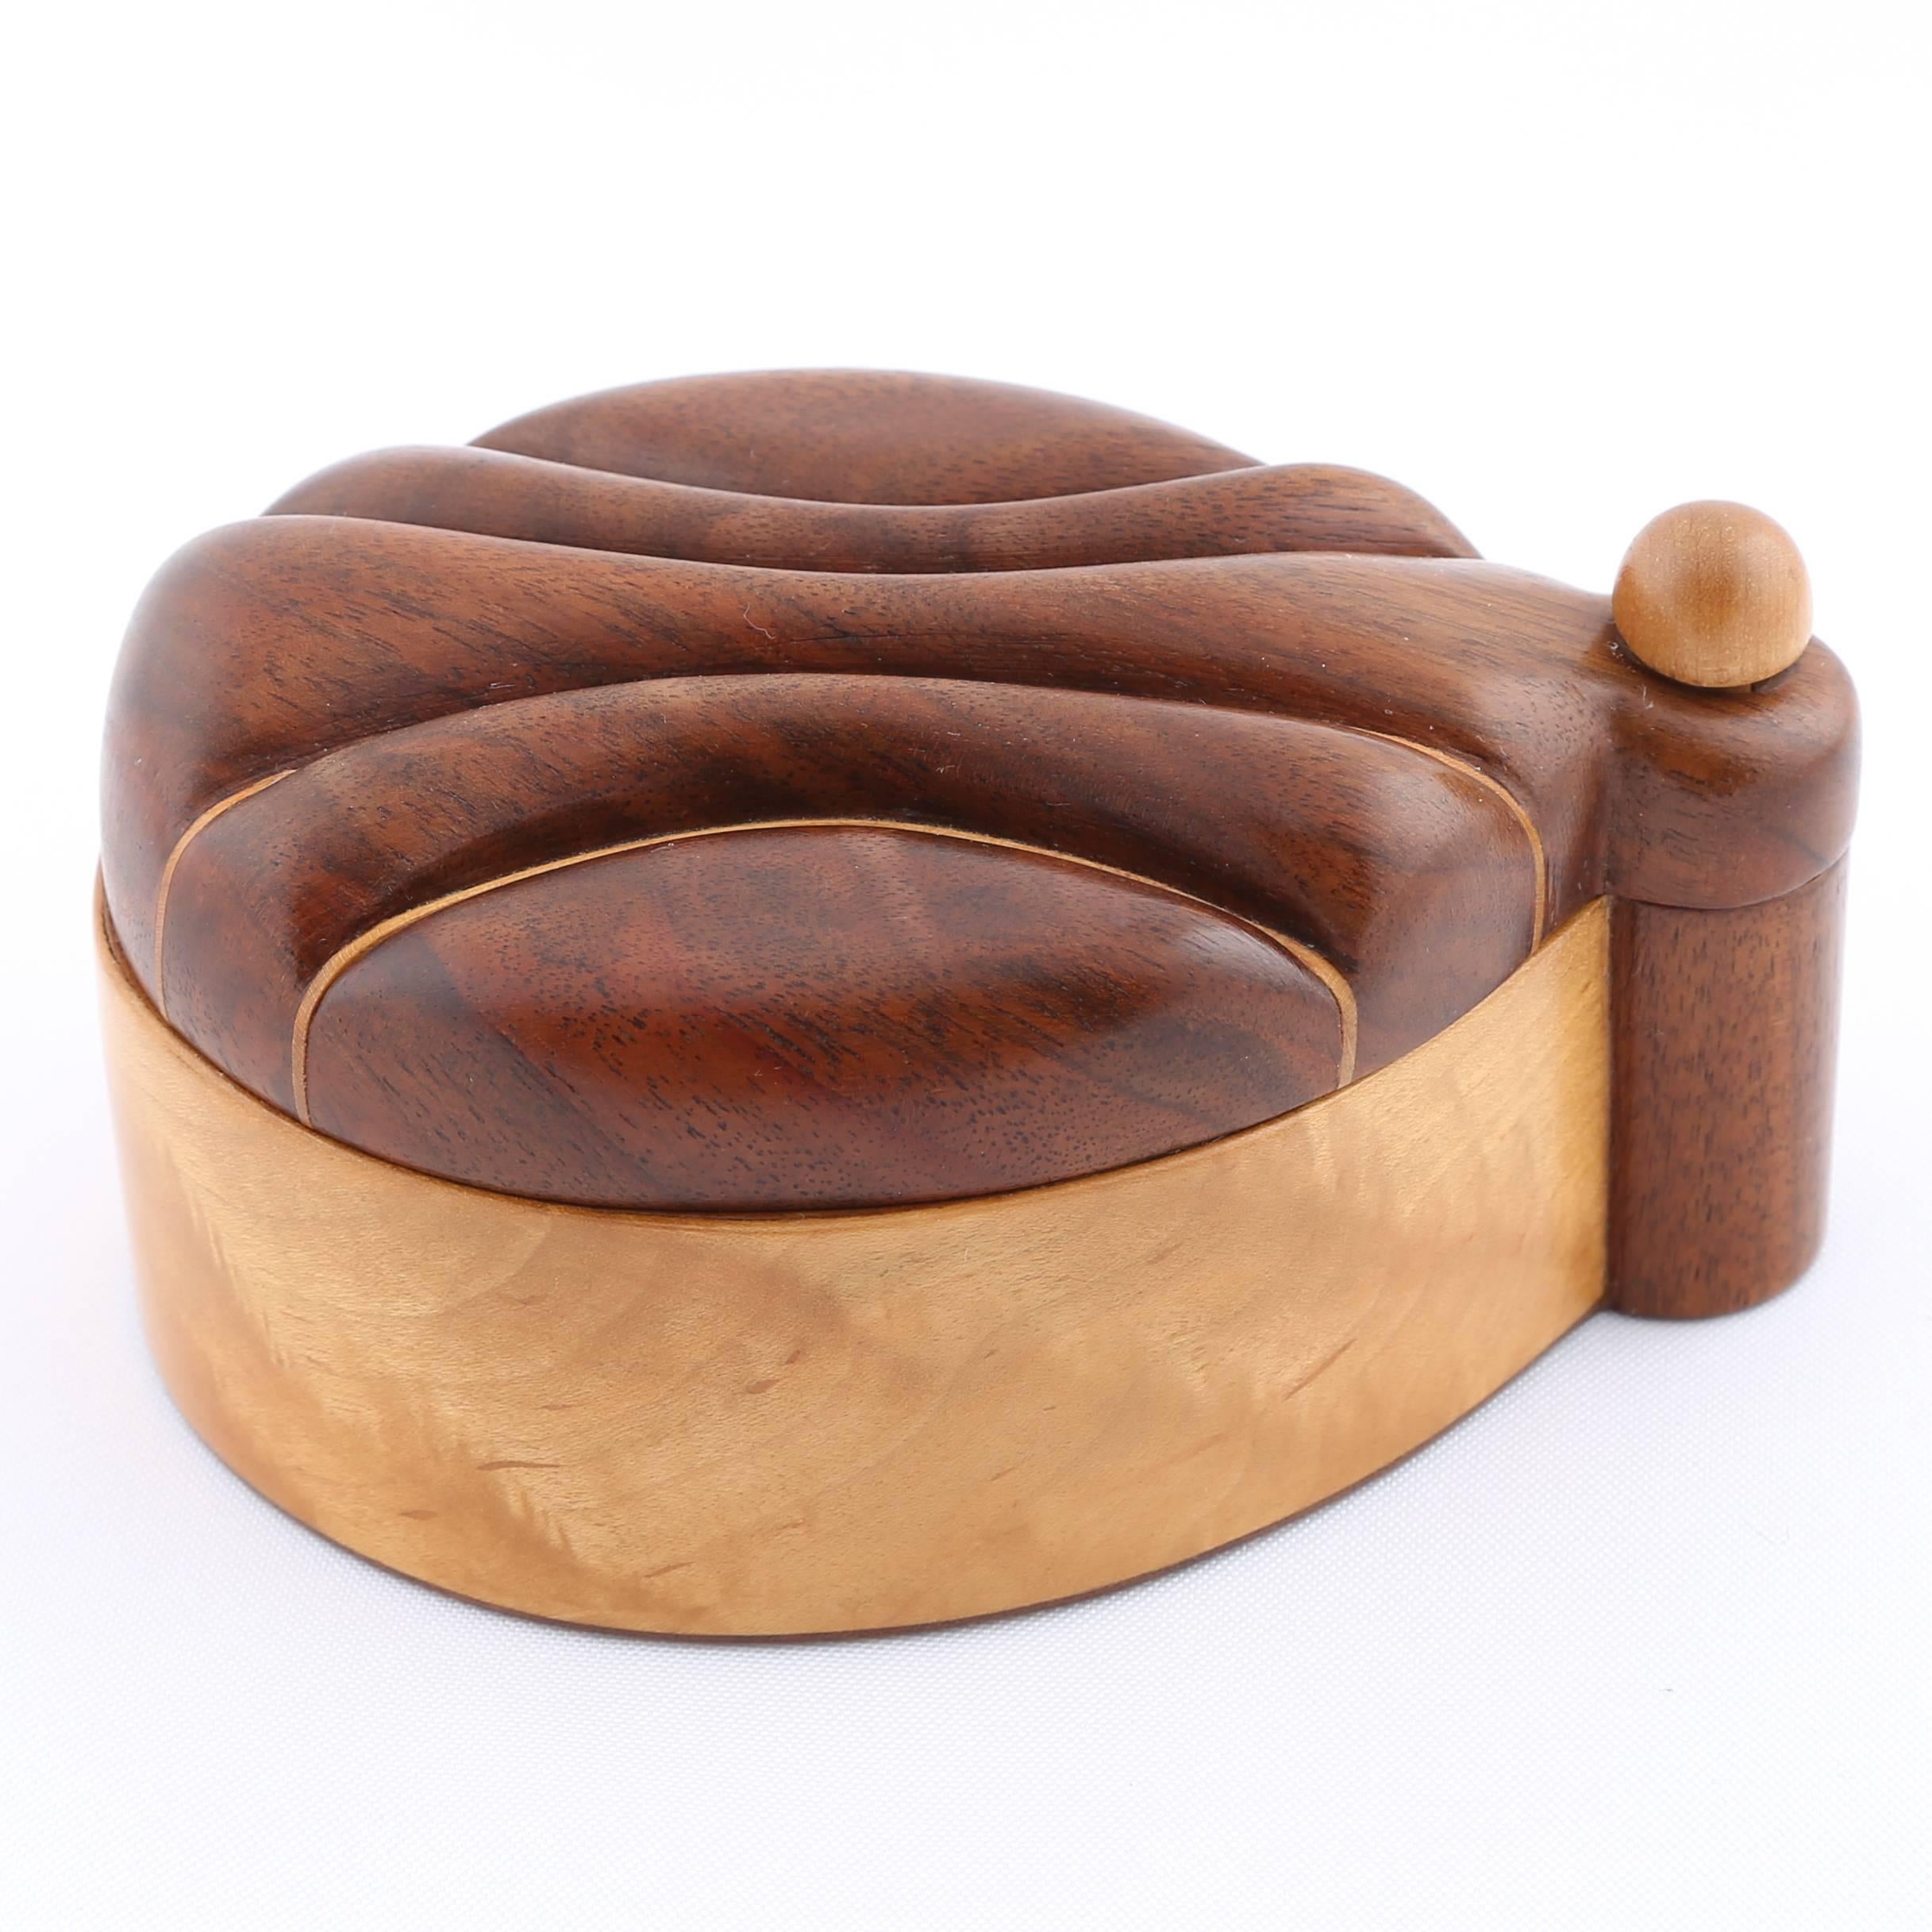 Lovely oval box with carved, swing-open top, made of mixed exotic woods and lined in black leather. Jerry Madrigale worked for Knoll's design and development division for many years and was in charge of prototyping anything made of wood or with